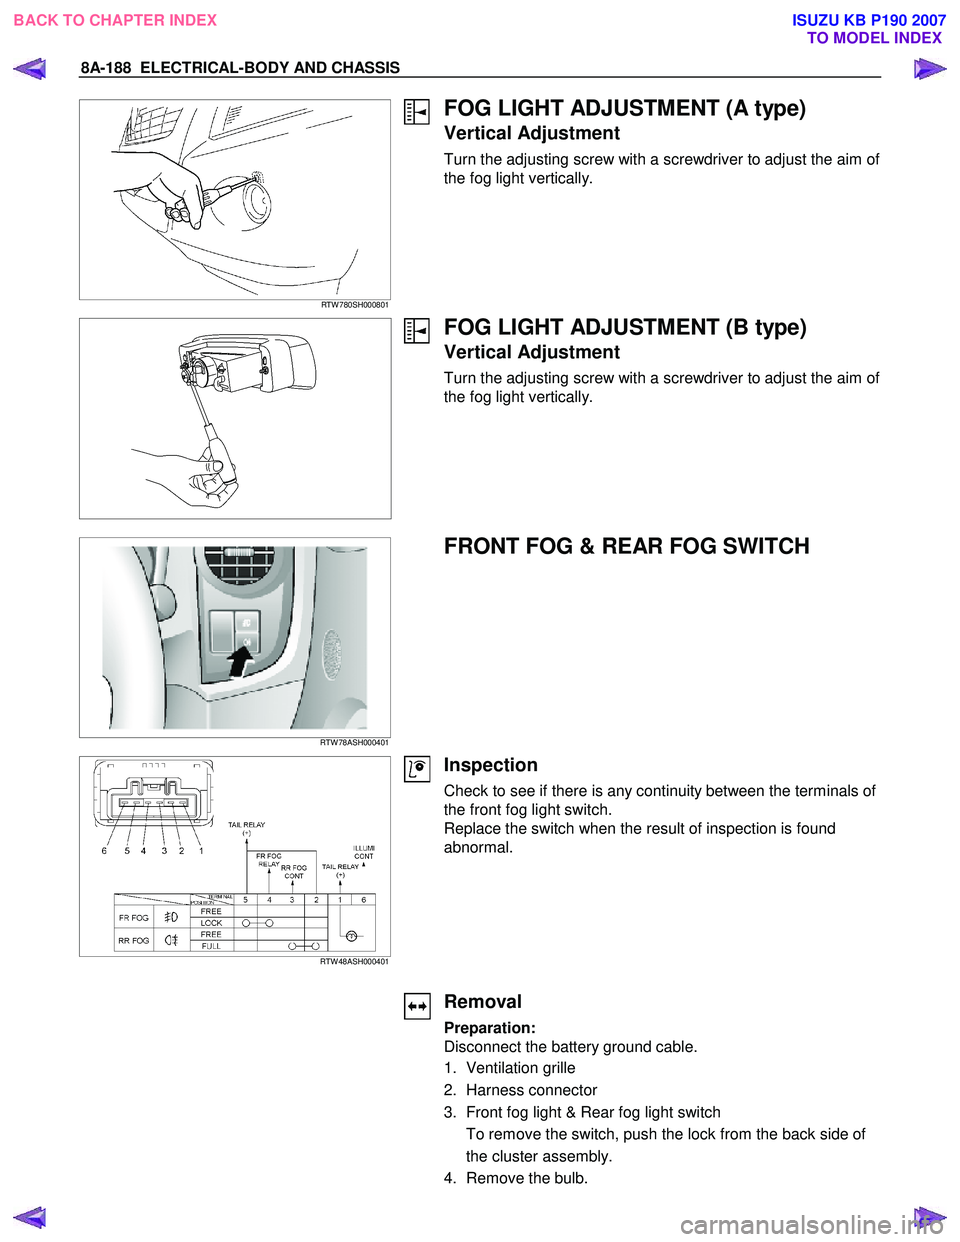 ISUZU KB P190 2007  Workshop Owners Manual 8A-188  ELECTRICAL-BODY AND CHASSIS 
  
 RTW 780SH000801 
FOG LIGHT ADJUSTMENT (A type) 
Vertical Adjustment 
Turn the adjusting screw with a screwdriver to adjust the aim of  
the fog light verticall